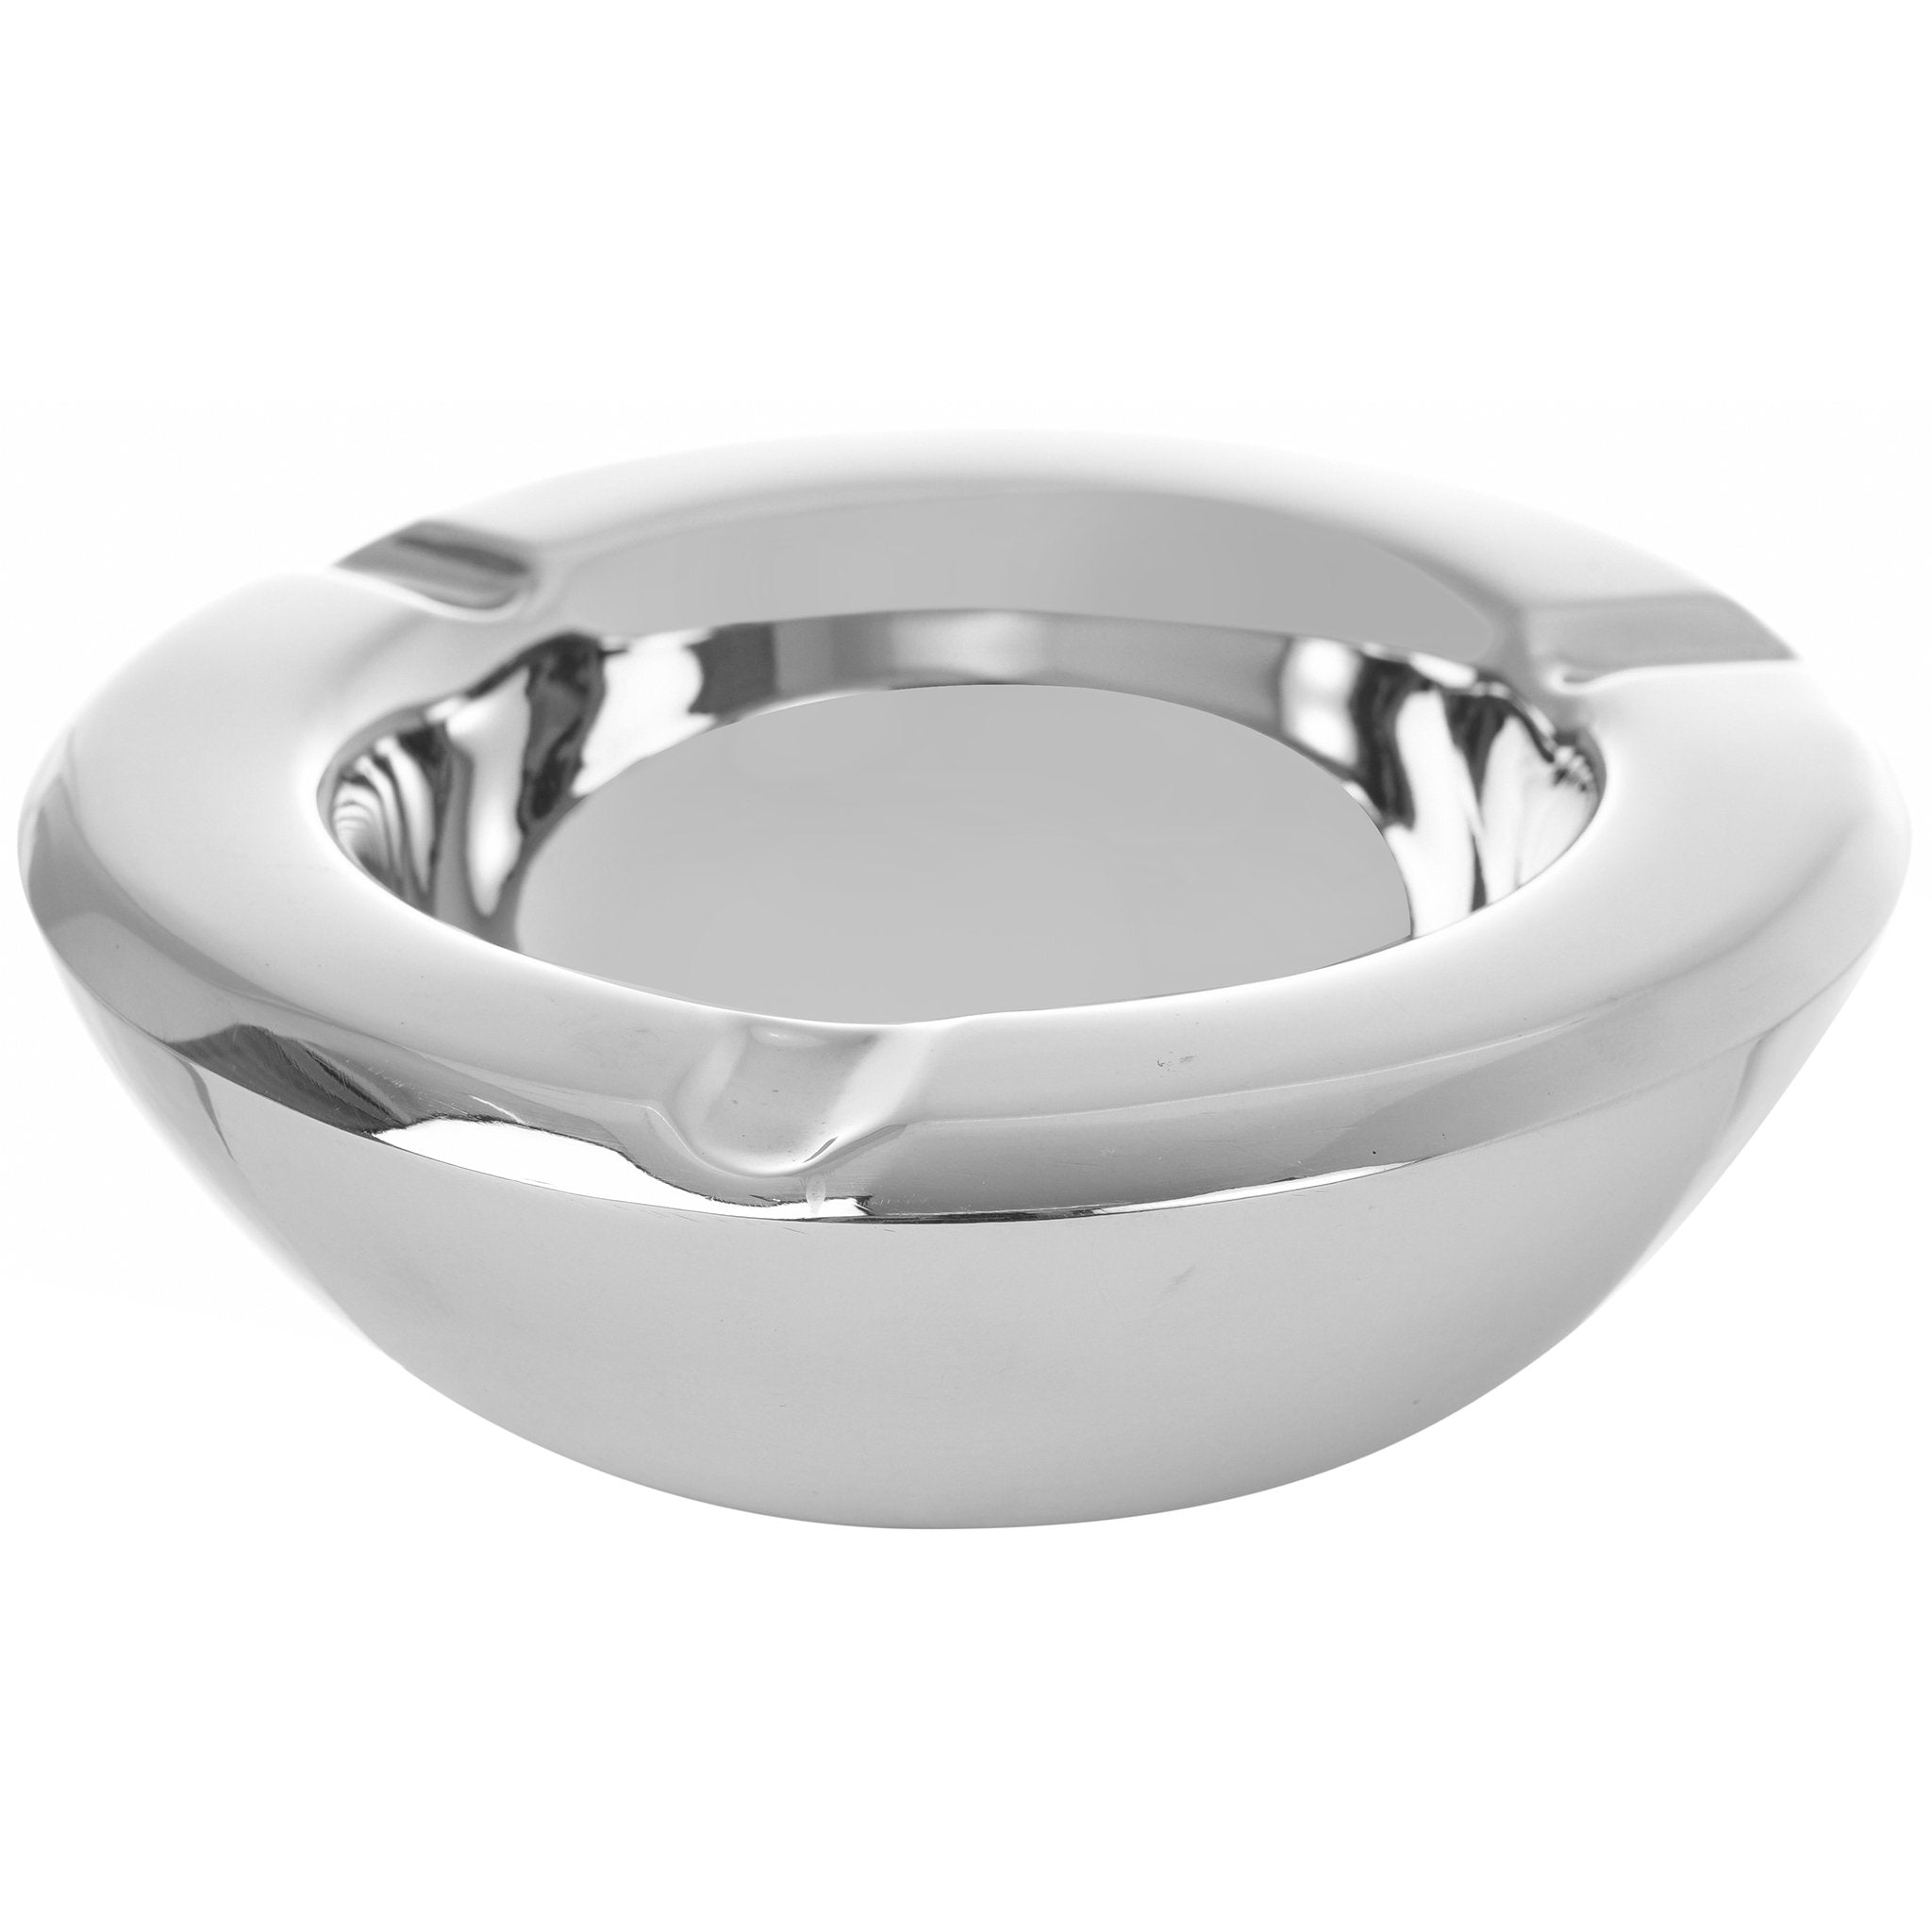 Round Ashtray - Stainless Steel - 13cm - 80003997